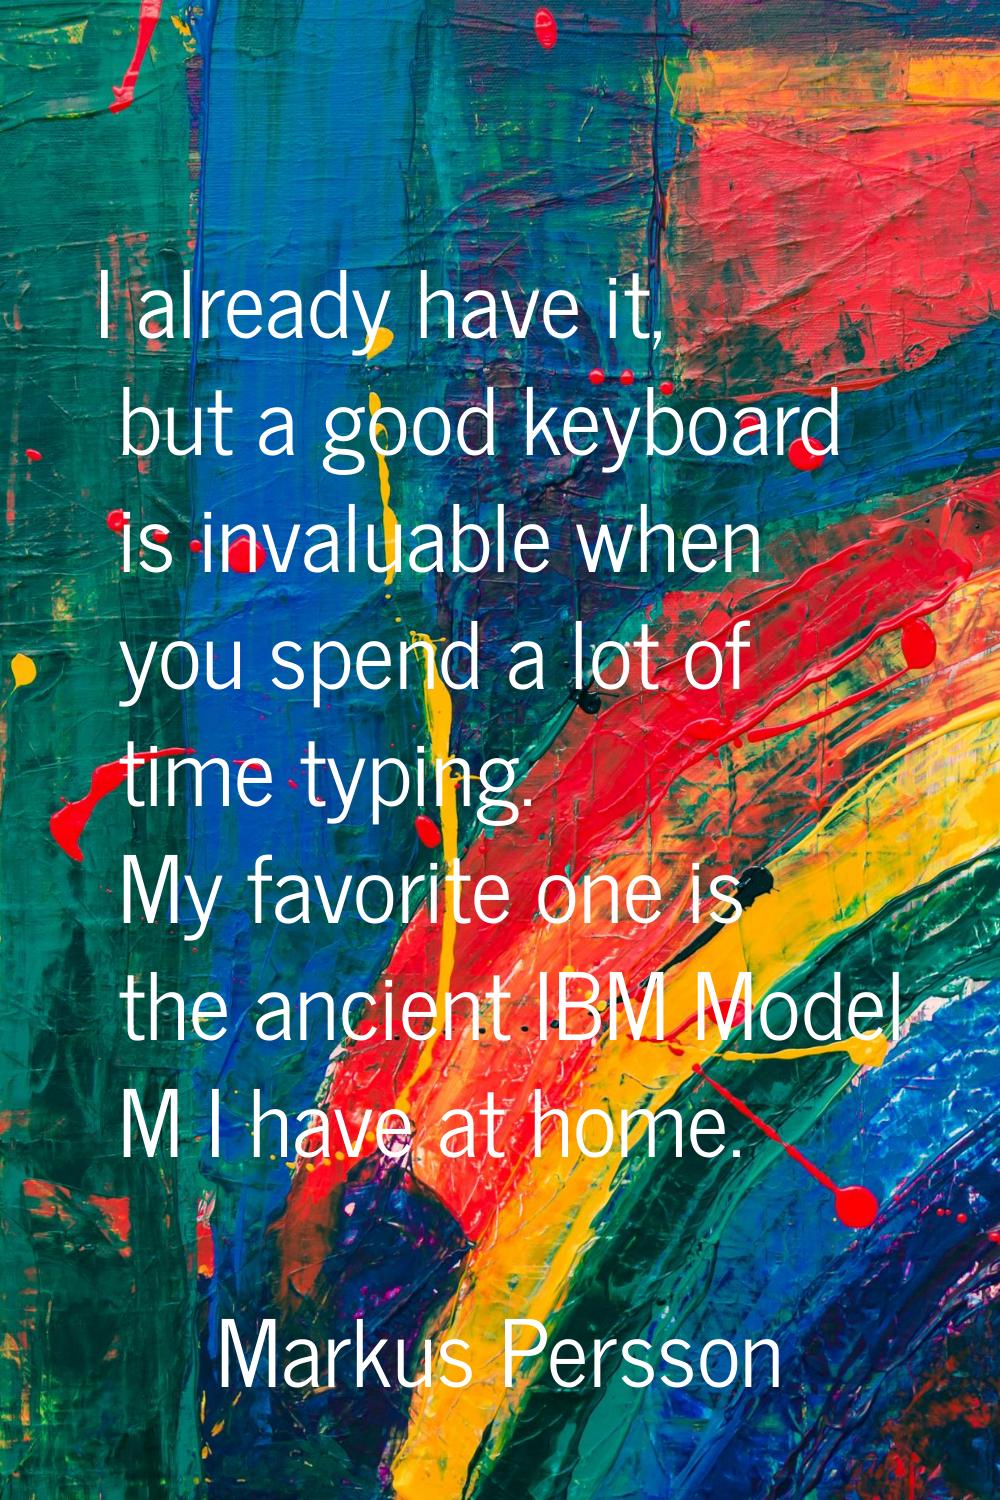 I already have it, but a good keyboard is invaluable when you spend a lot of time typing. My favori